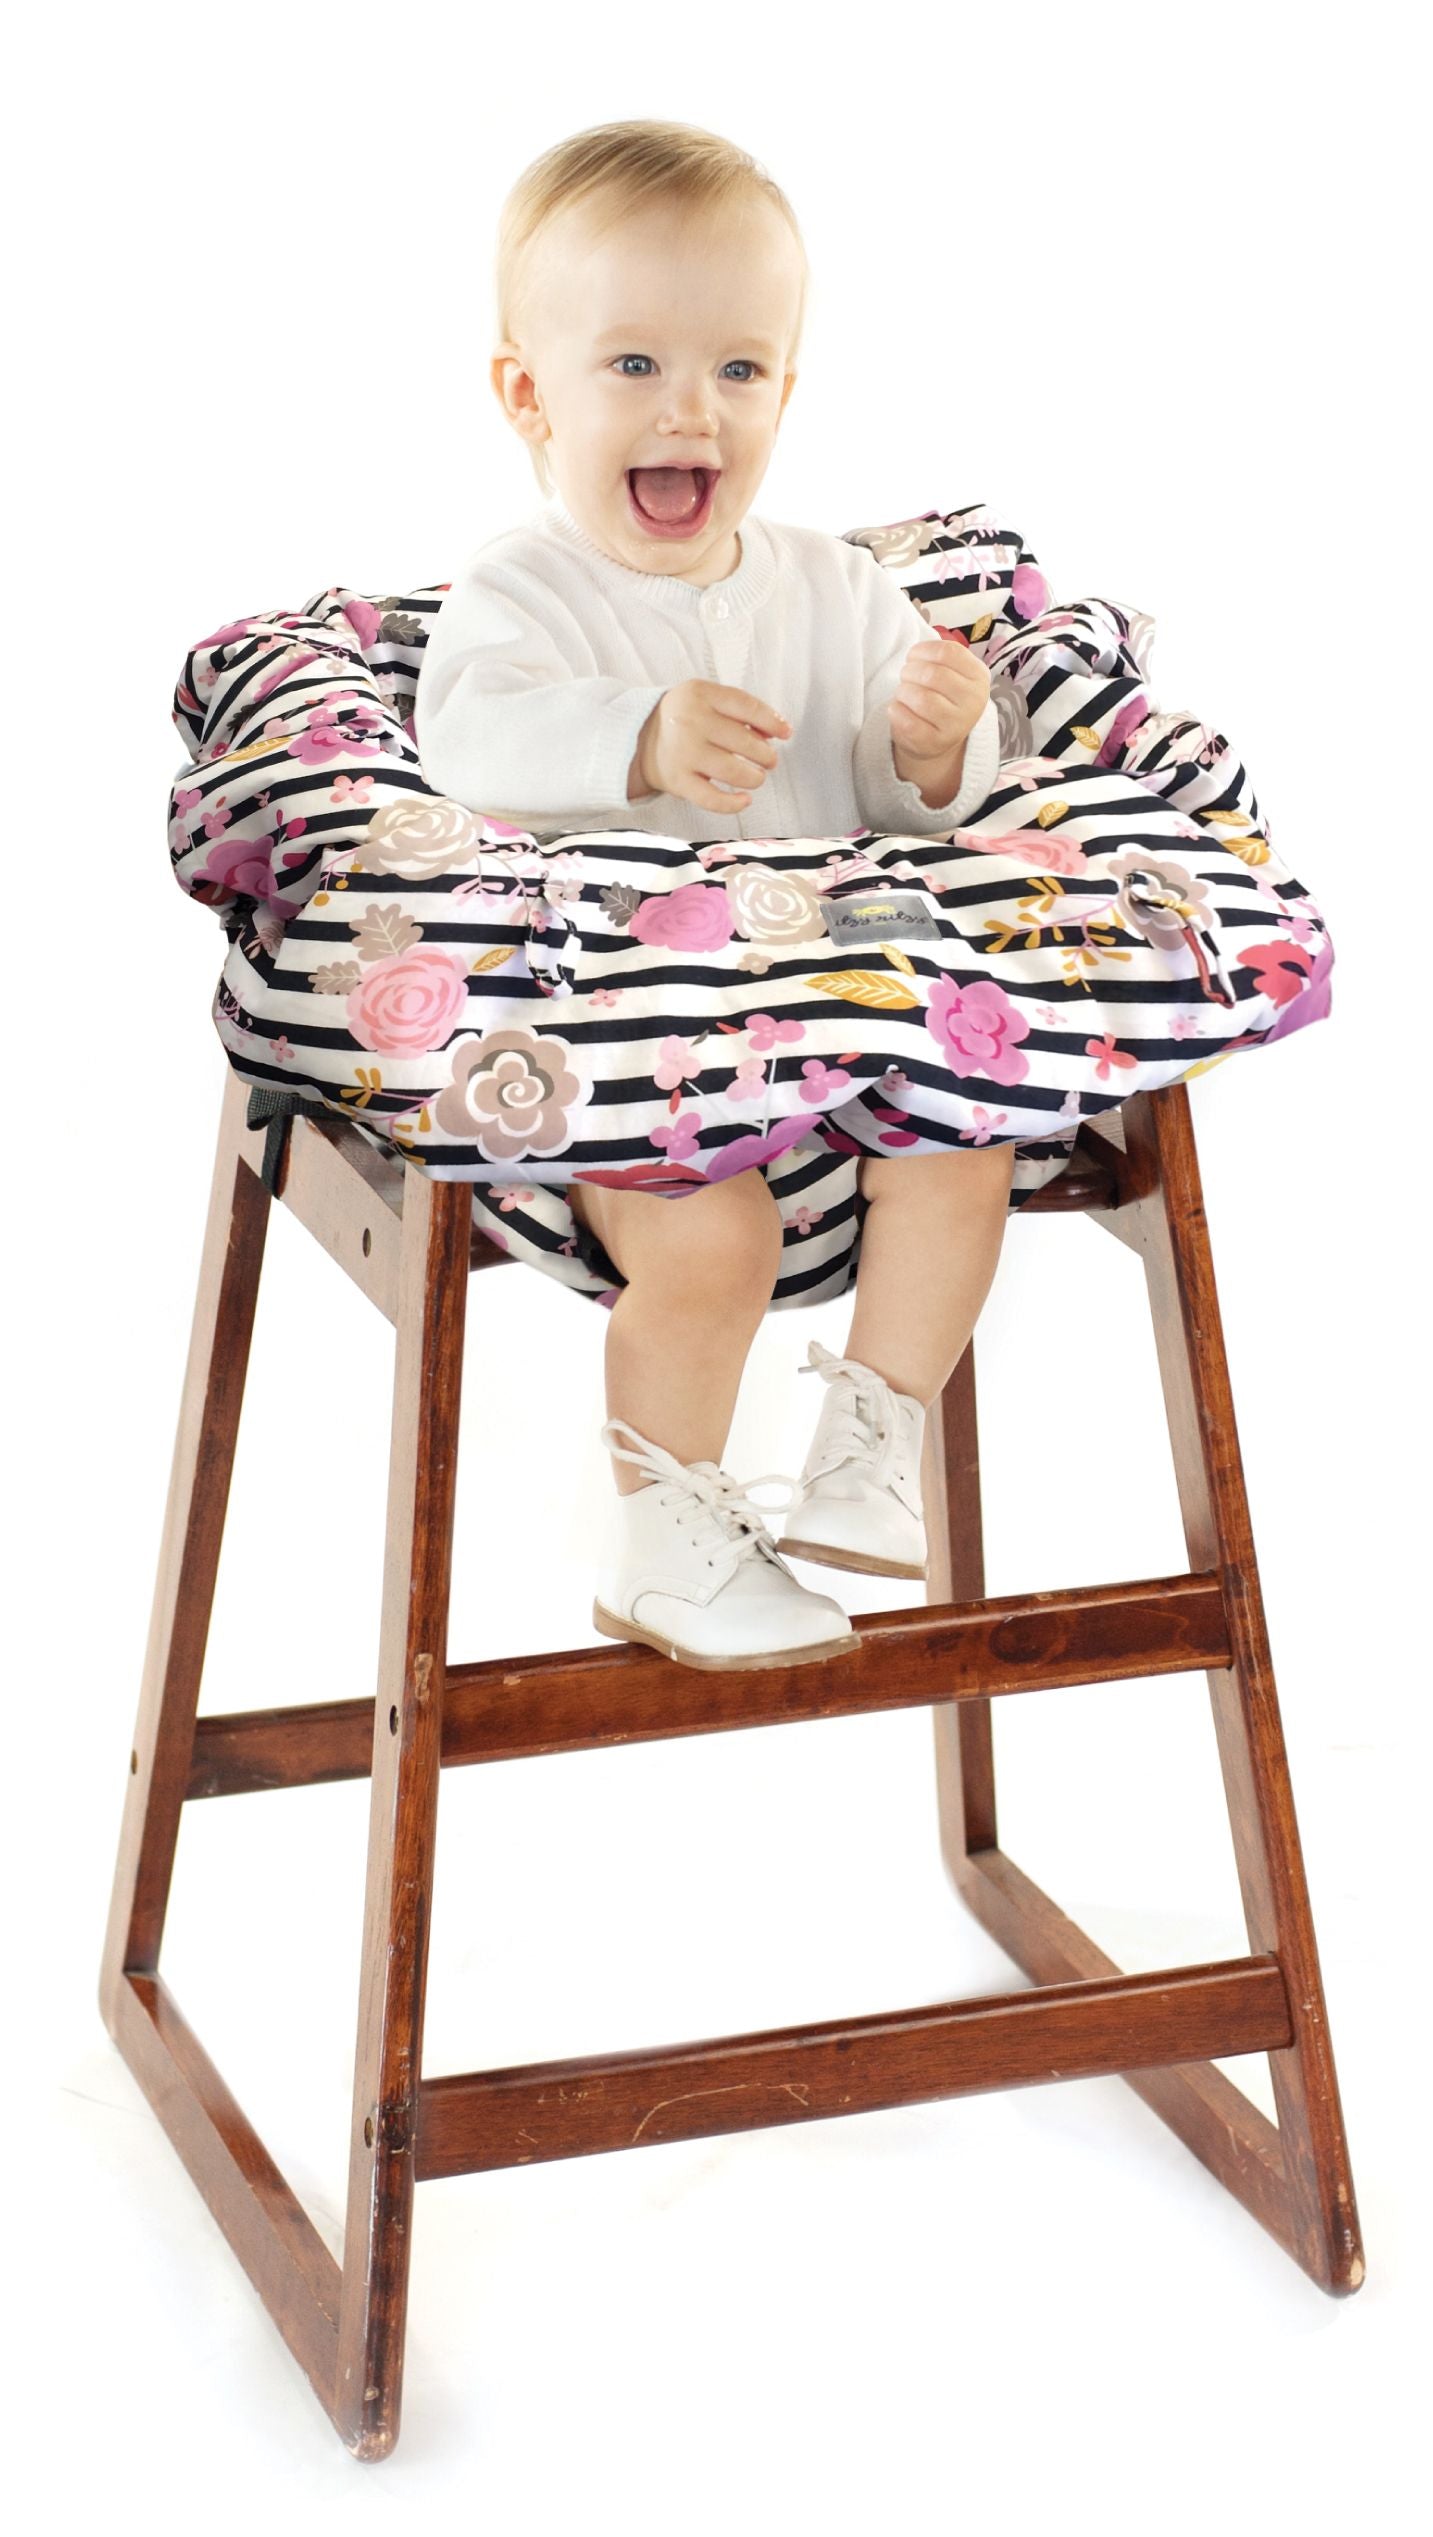 Itzy Ritzy - Ritzy Sitzy Shopping Cart and High Chair Cover